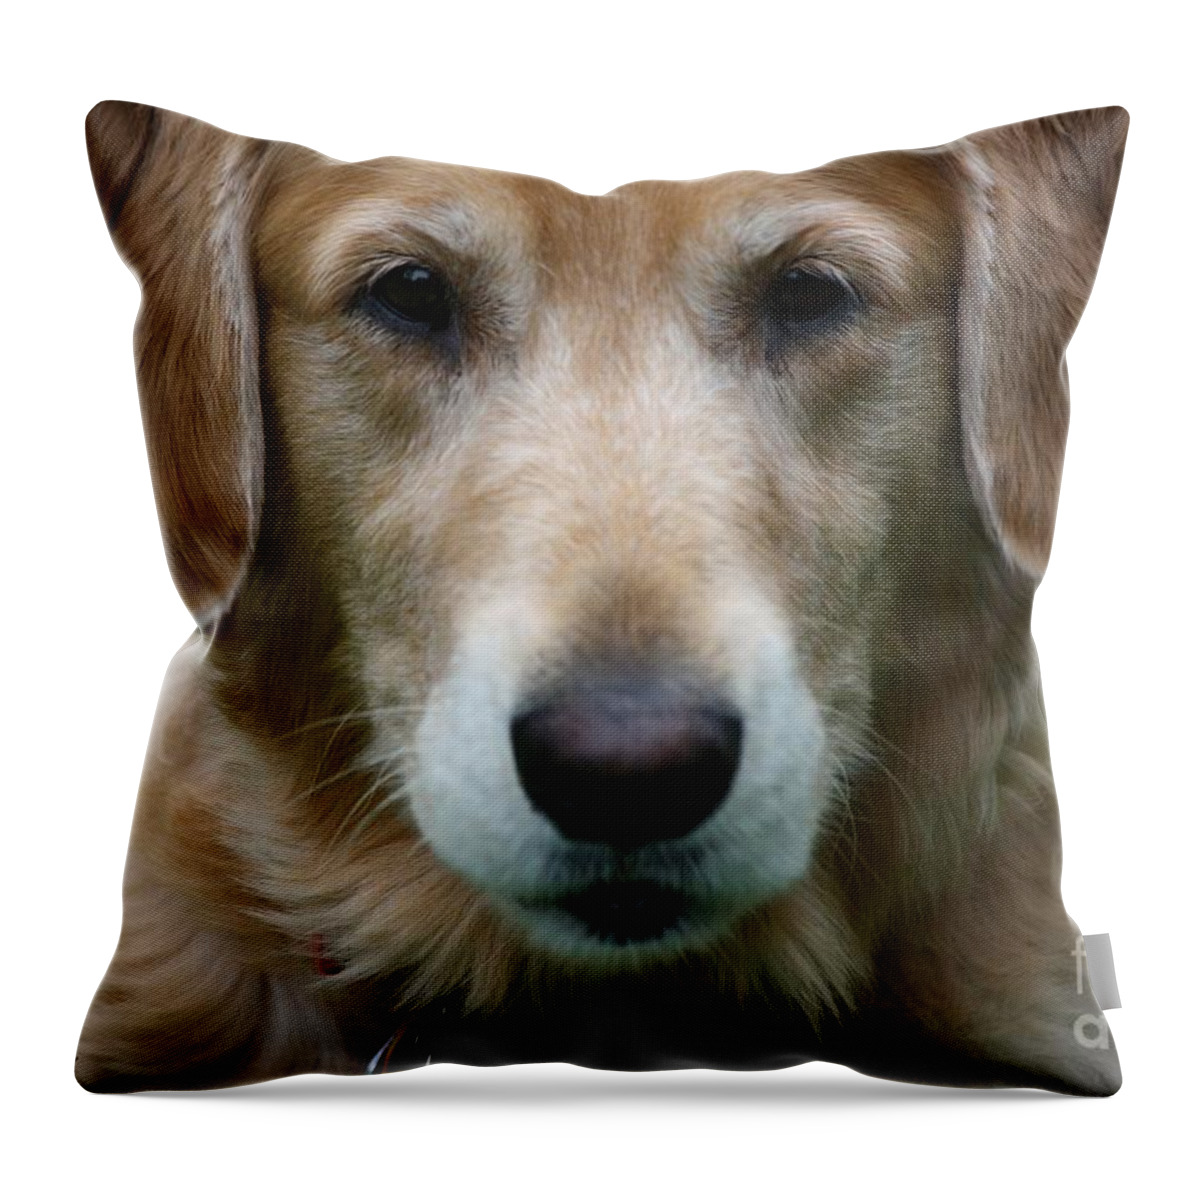 Dog Throw Pillow featuring the photograph Canine Close Up by Veronica Batterson